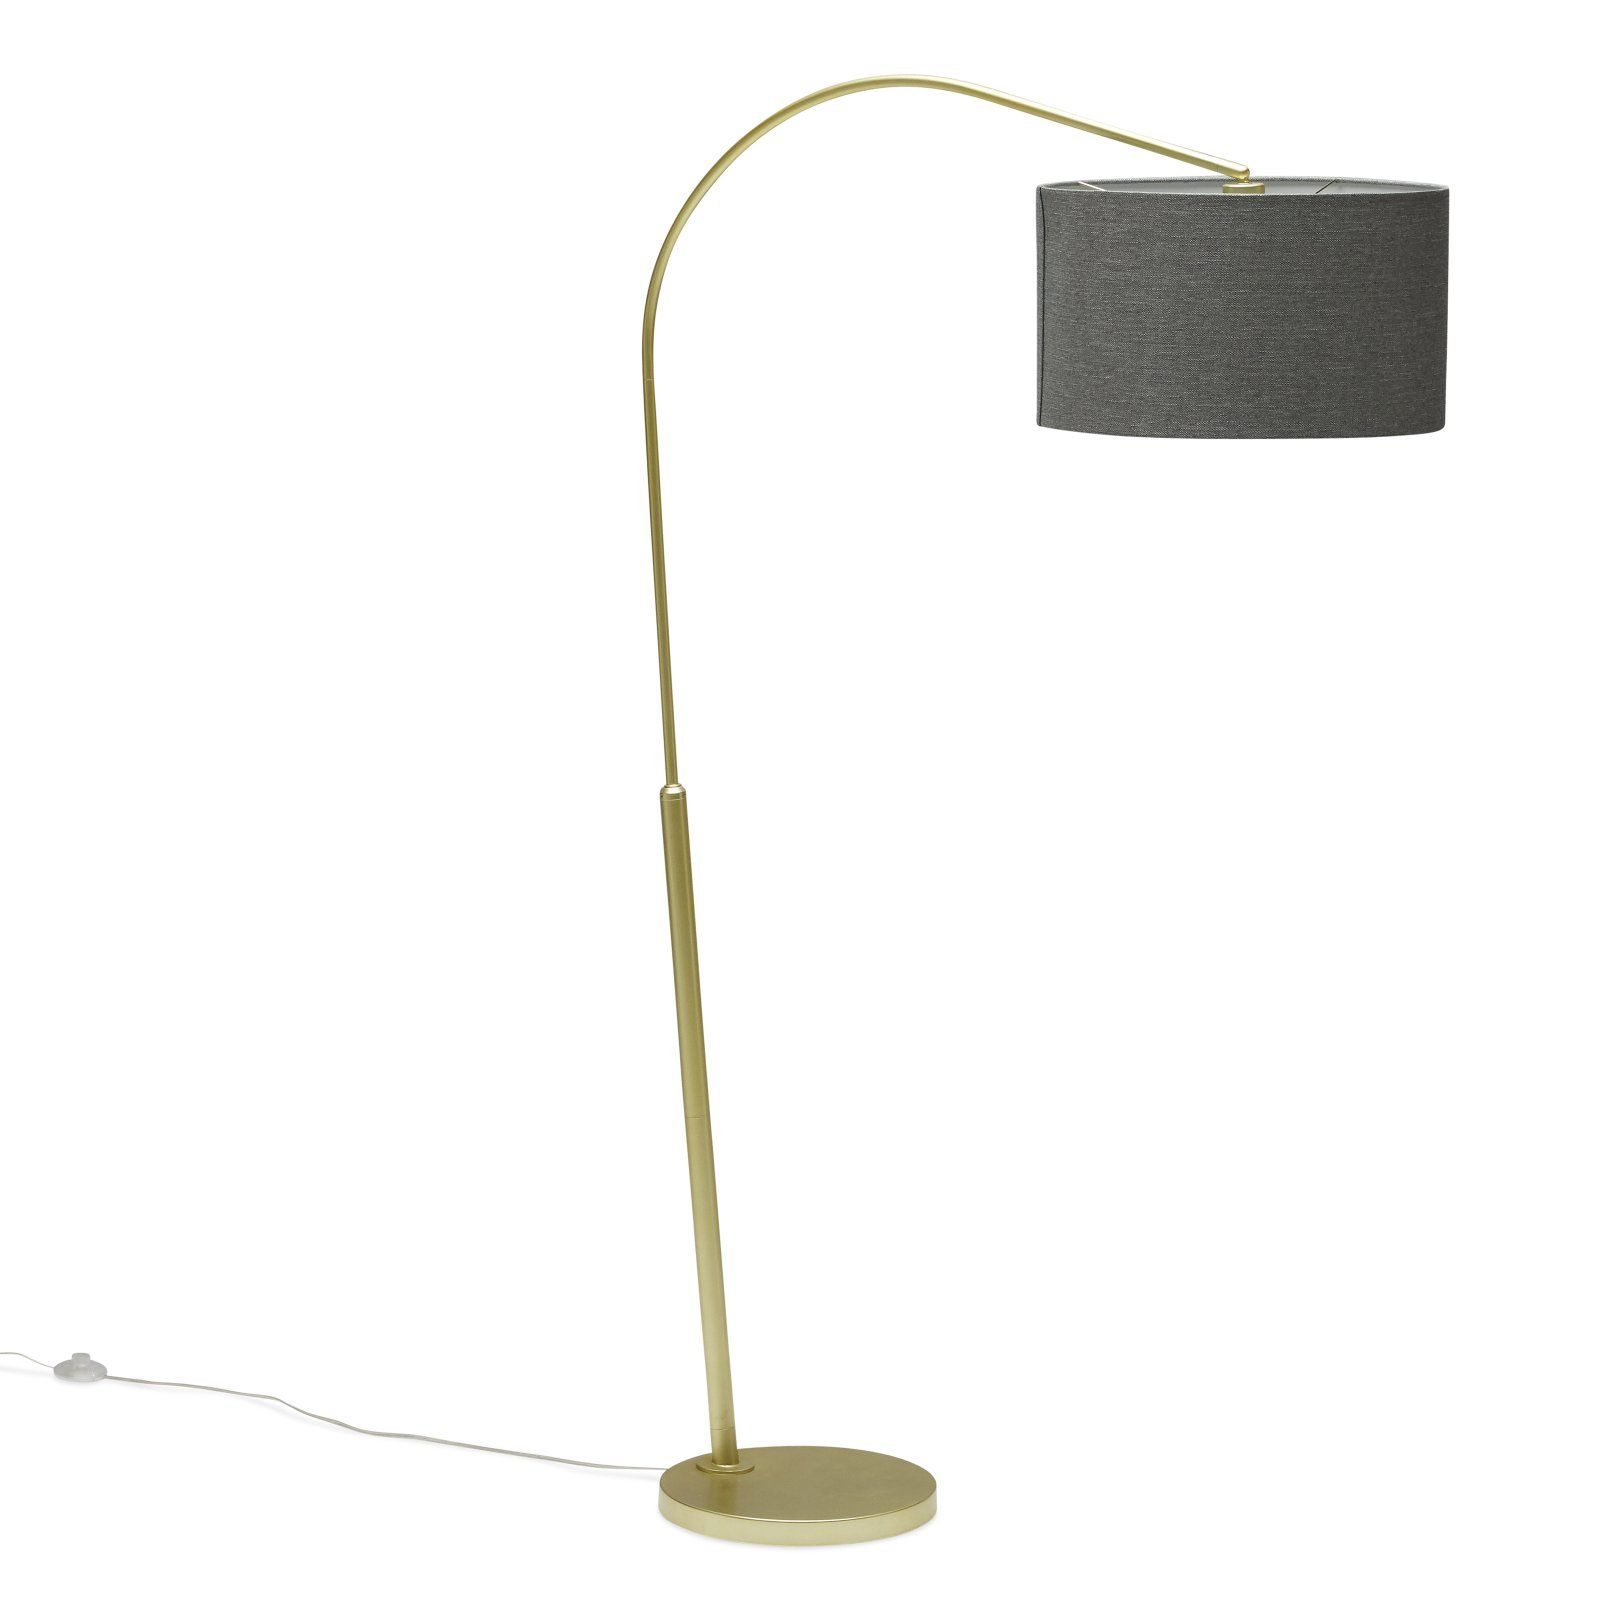 Modrn Mid Century Hangover Floor Lamp With Tweed Drum Shade intended for dimensions 1600 X 1600